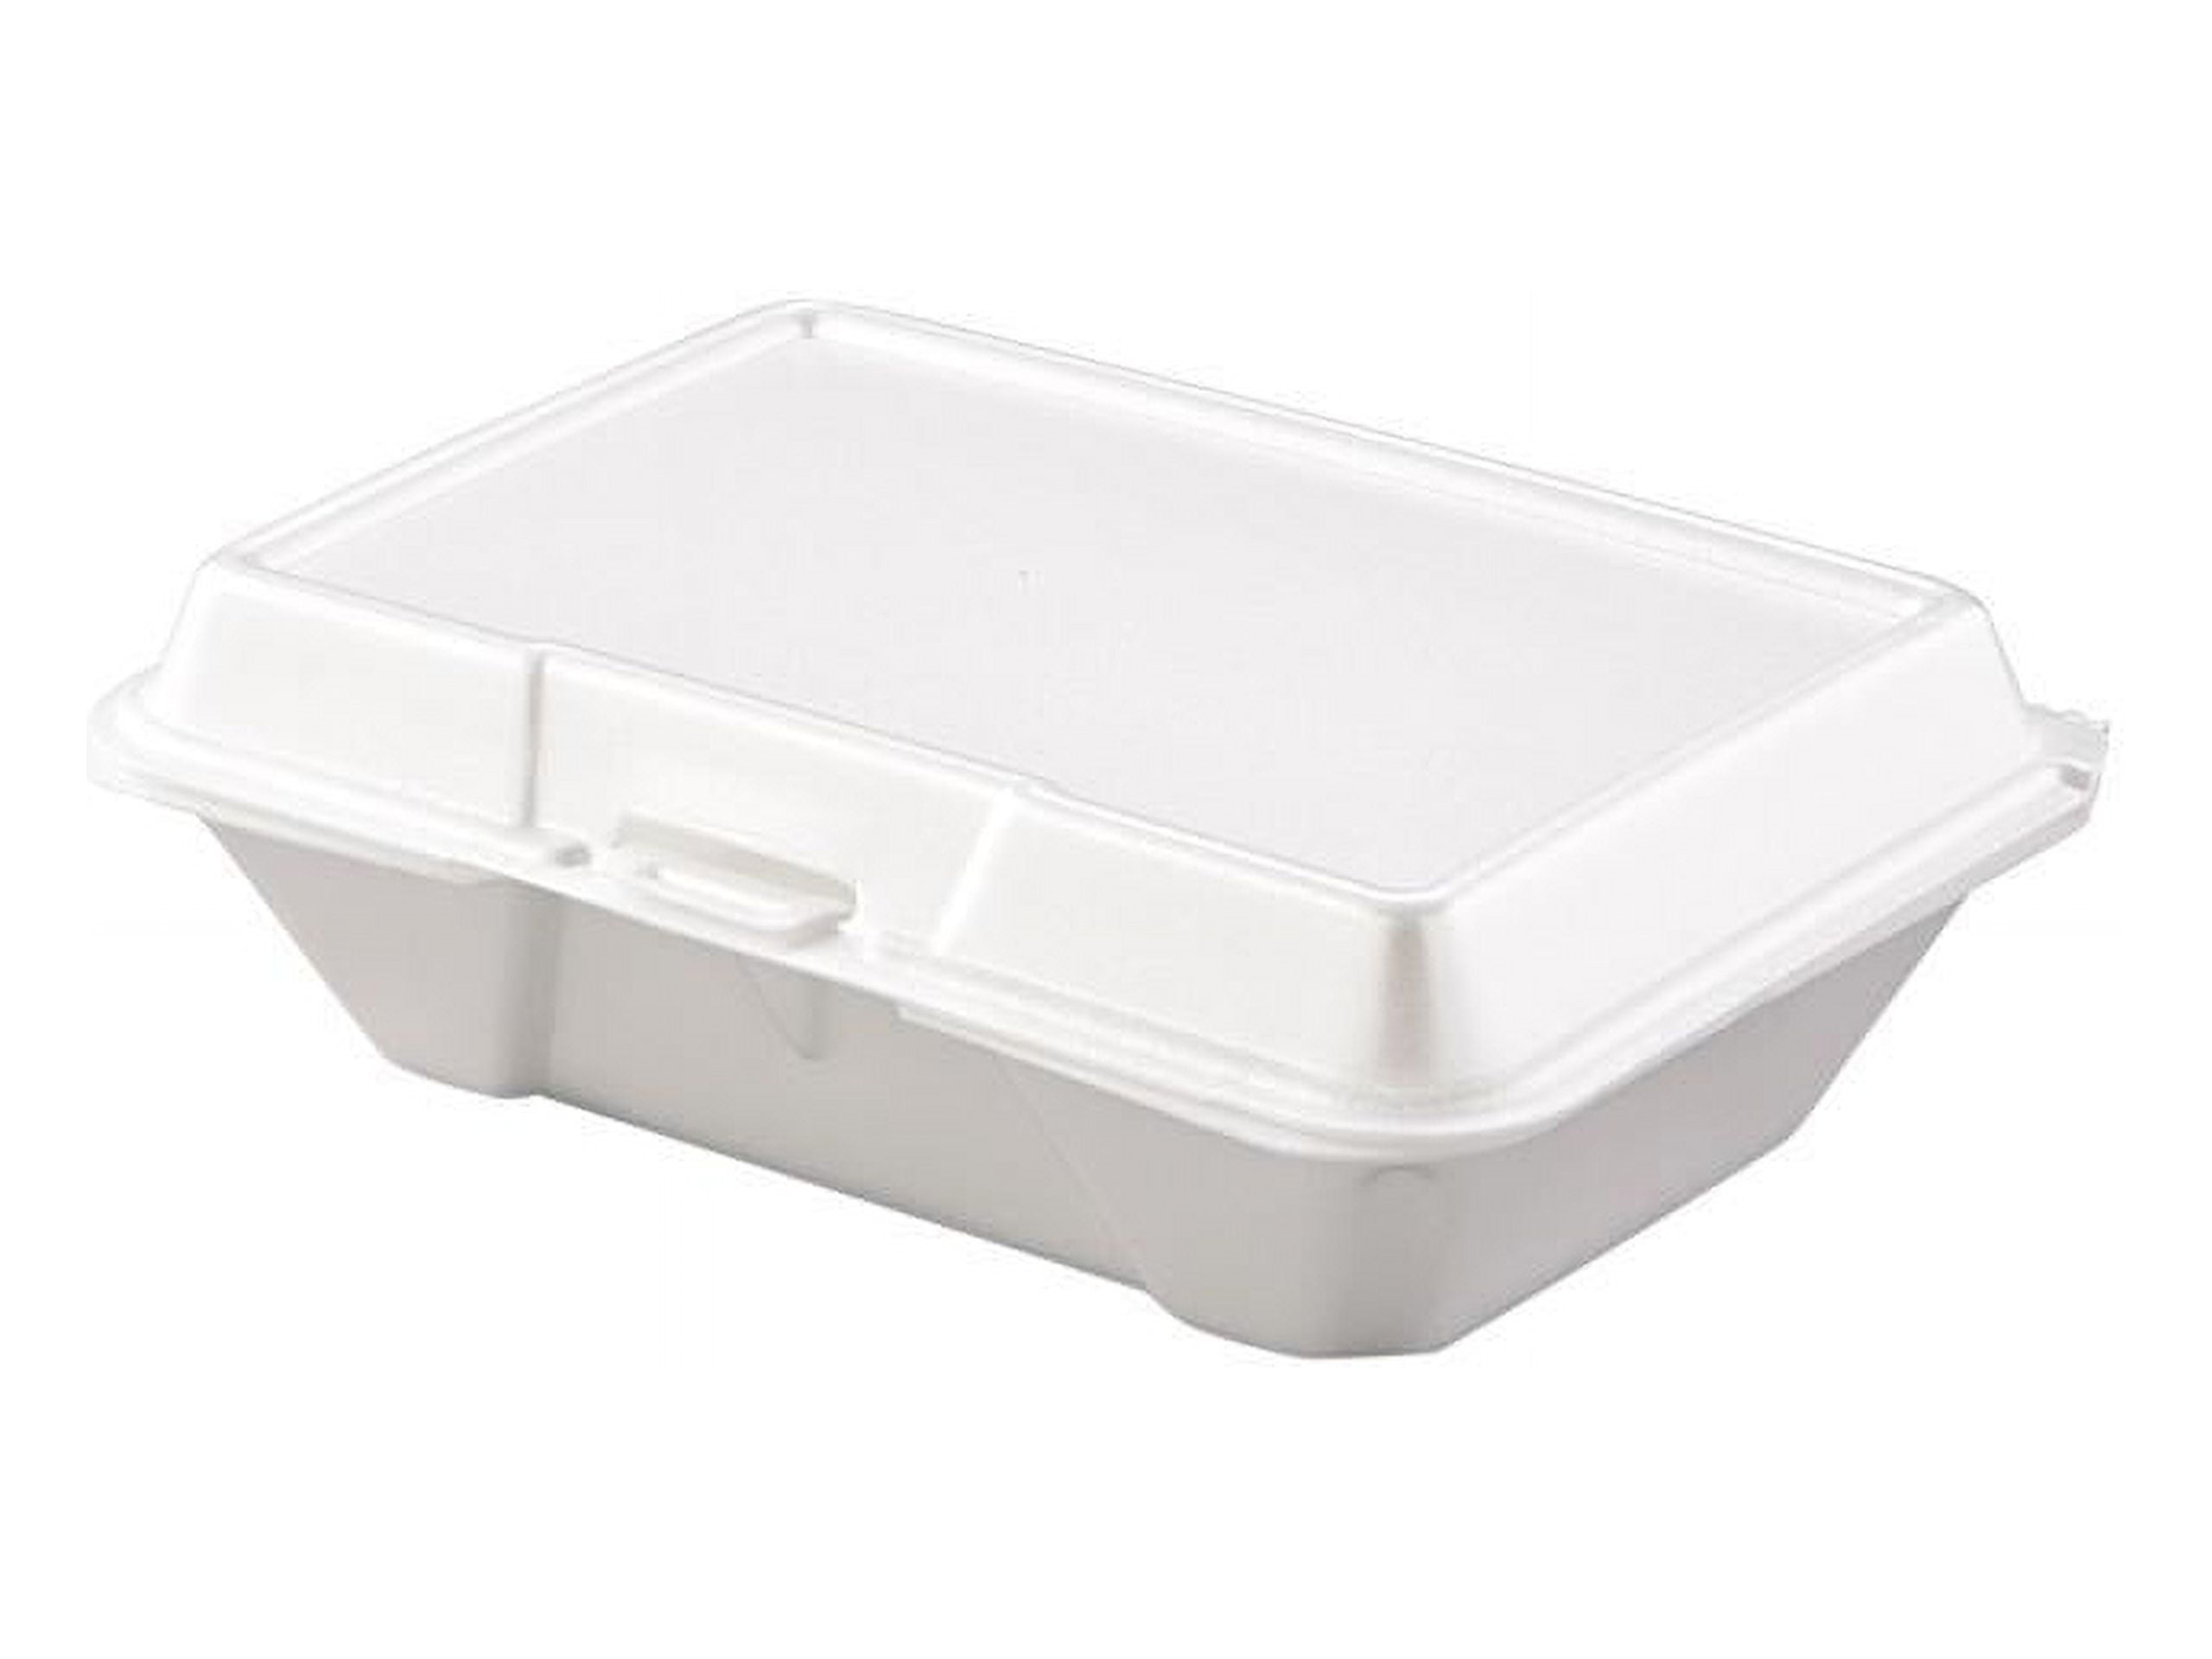 Asporto 26 oz White Plastic 3 Compartment Food Container - with Clear Lid,  Microwavable - 8 3/4 x 6 x 1 3/4 - 100 count box